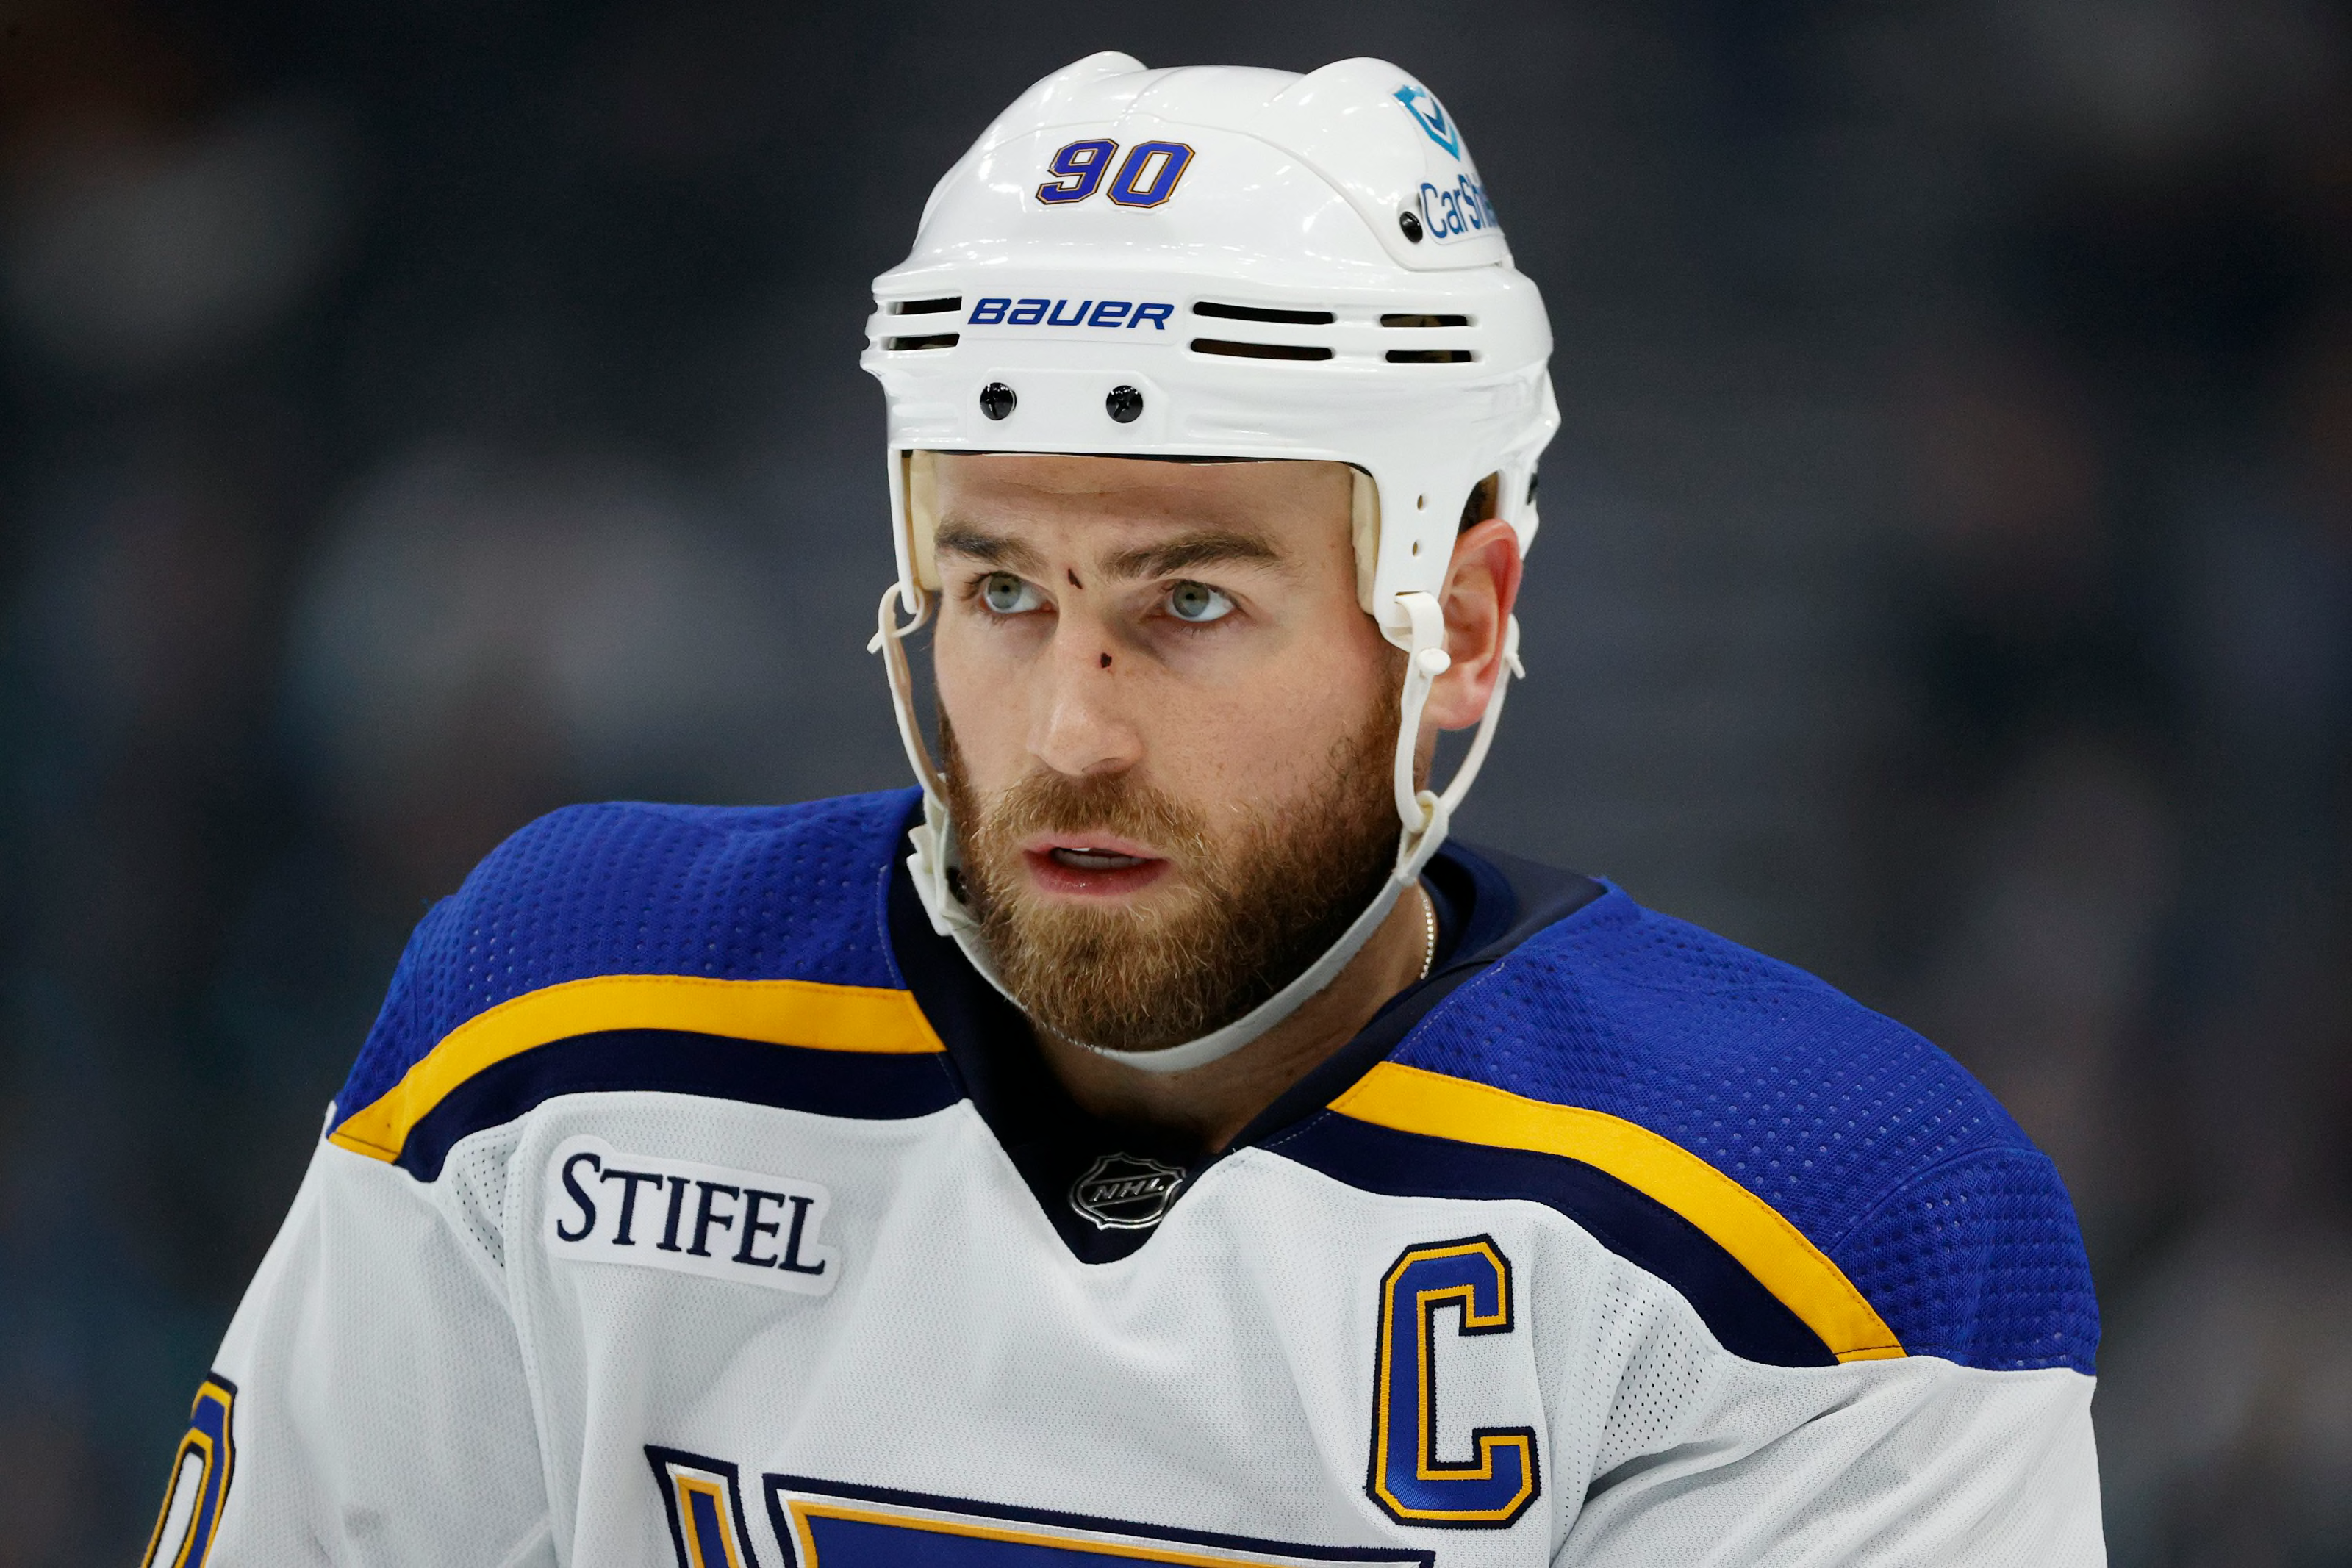 Ryan O'Reilly speaks on the pressure playing in Toronto